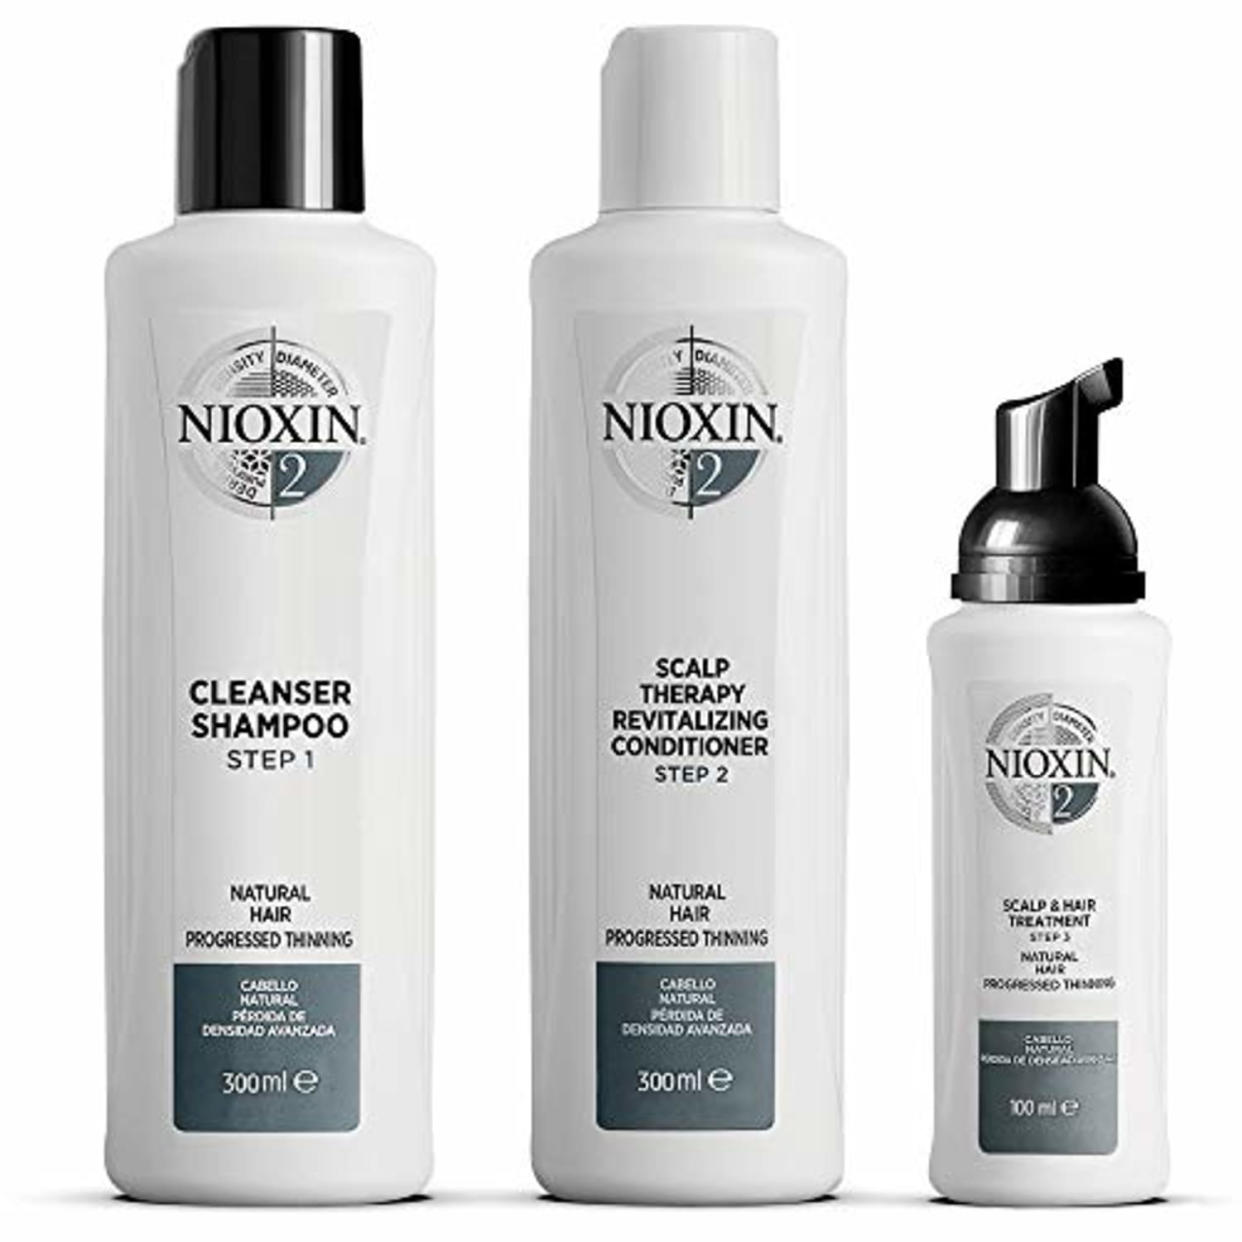 Nioxin System Kit 2, Natural Hair with Light Thinning, Full Size (3 Month Supply) (Amazon / Amazon)